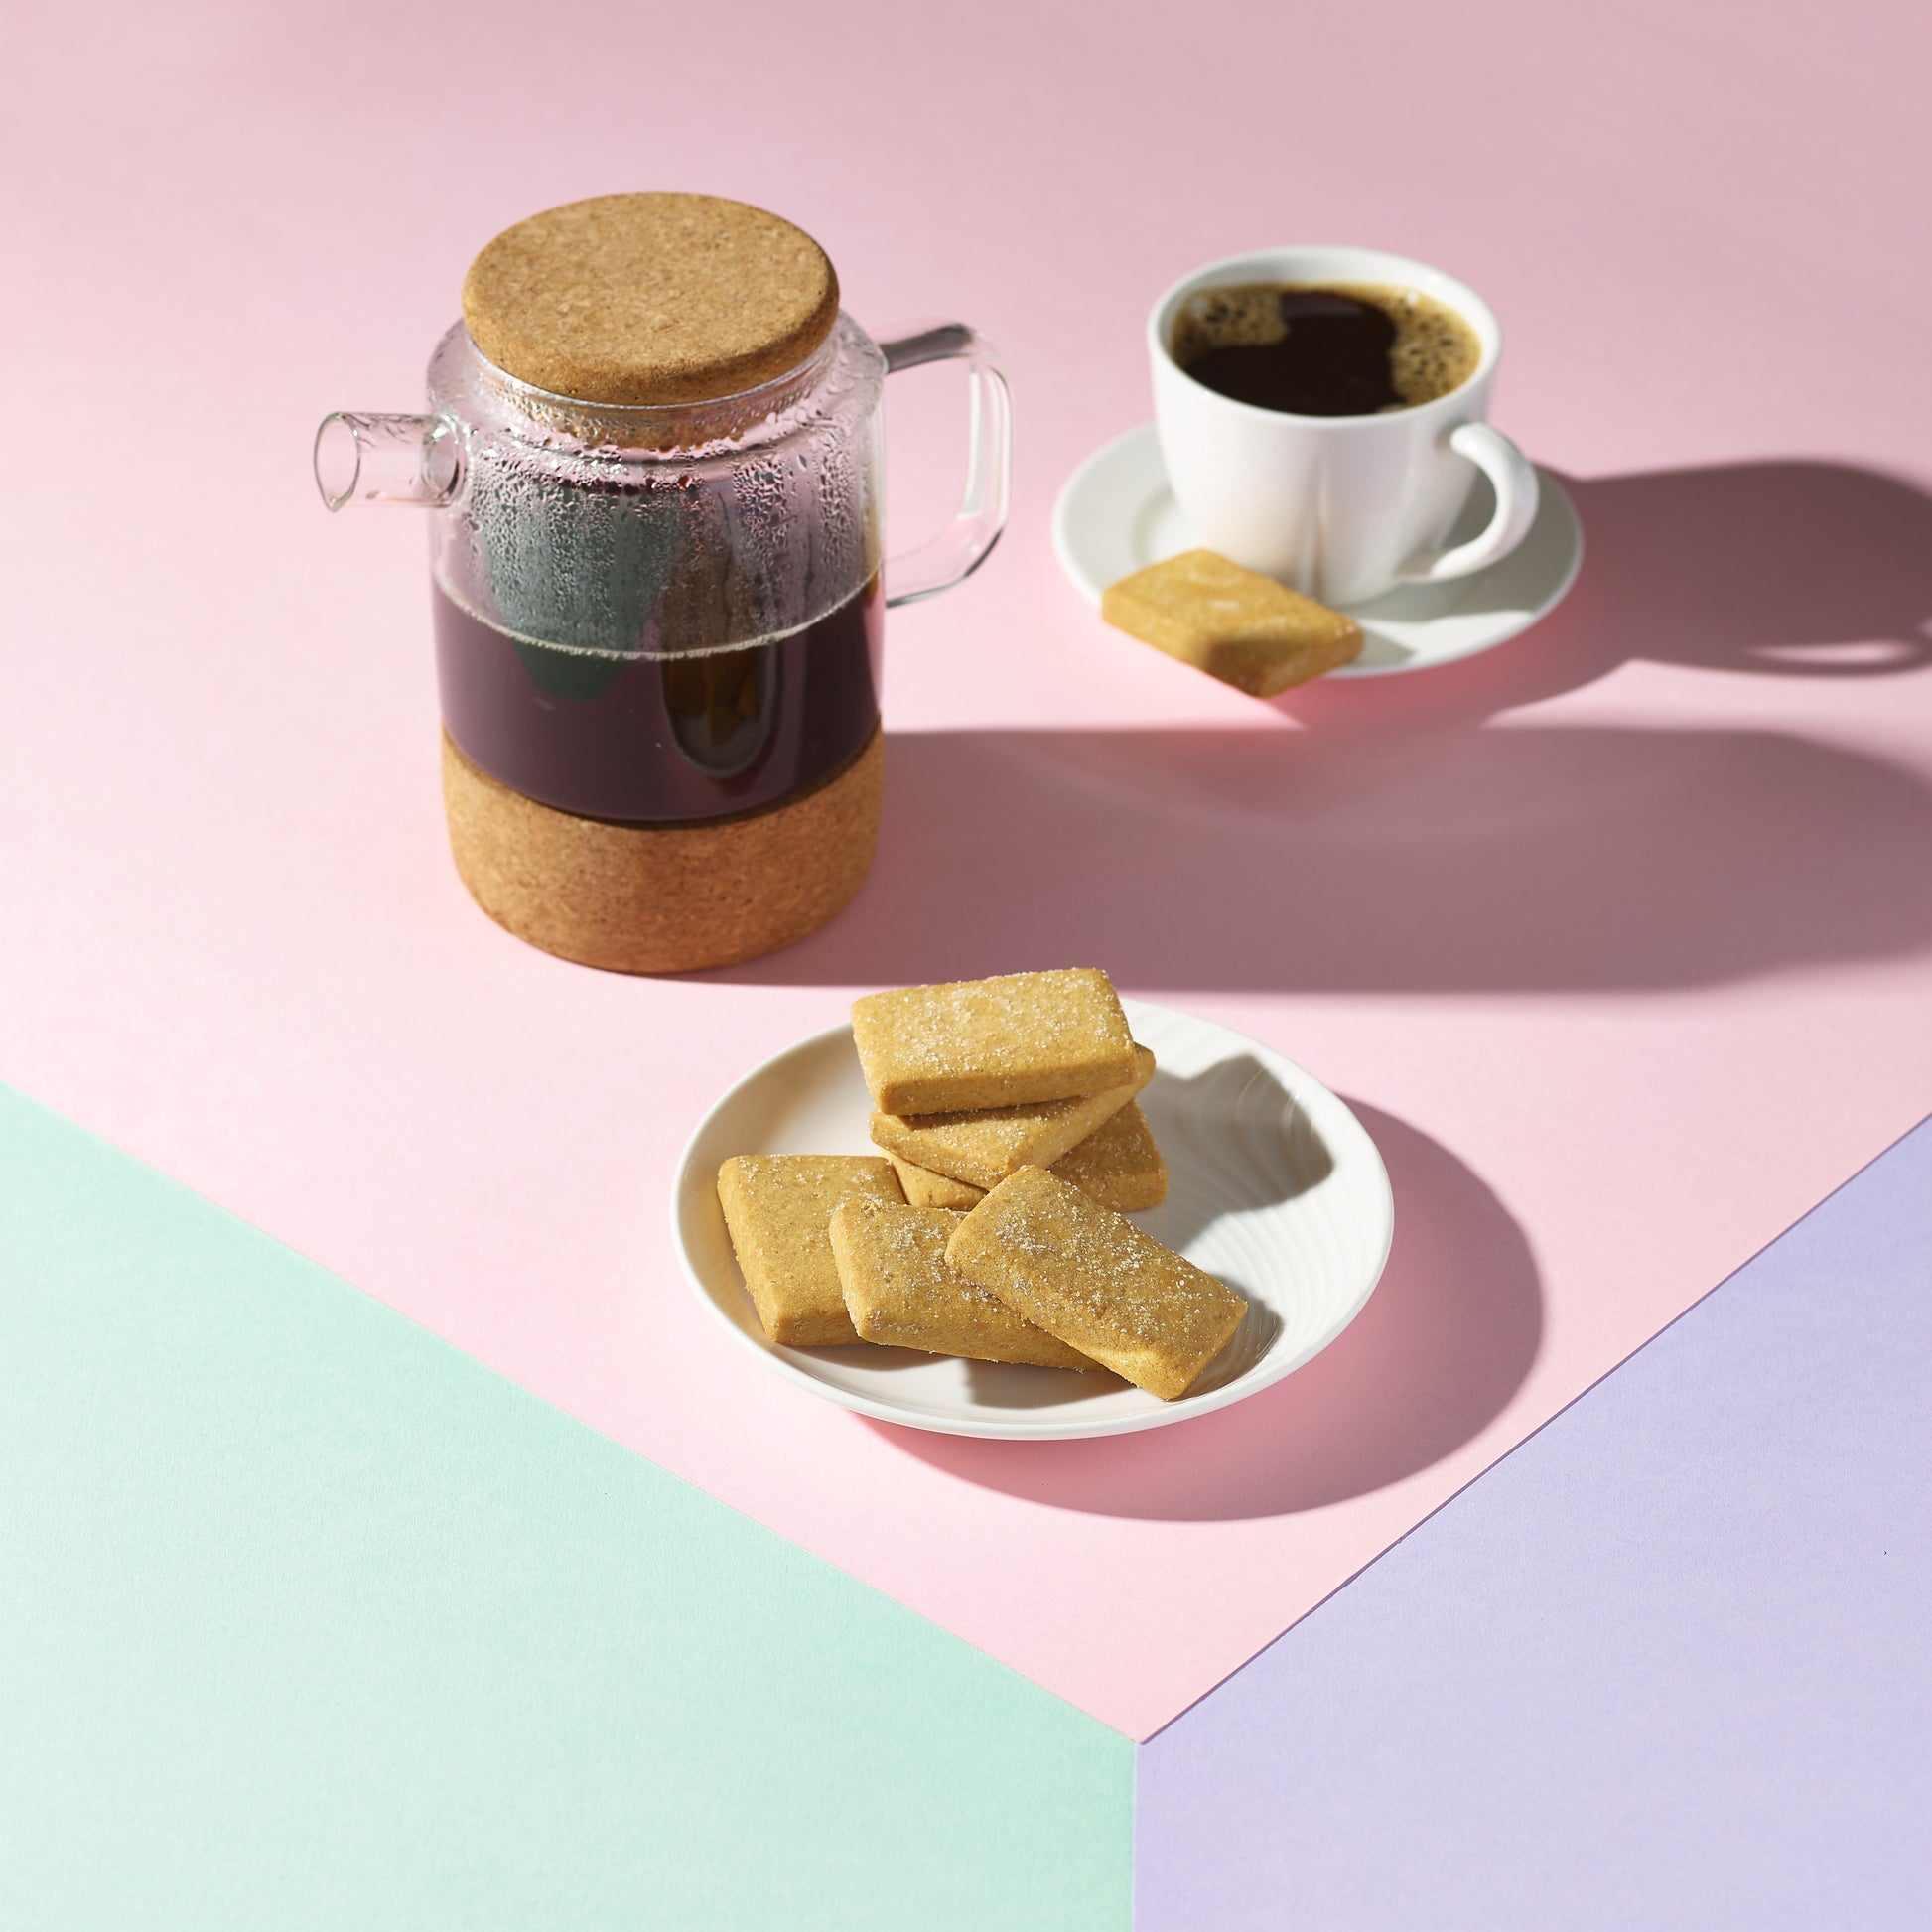 shortbread on plate with filter coffee jar and cup